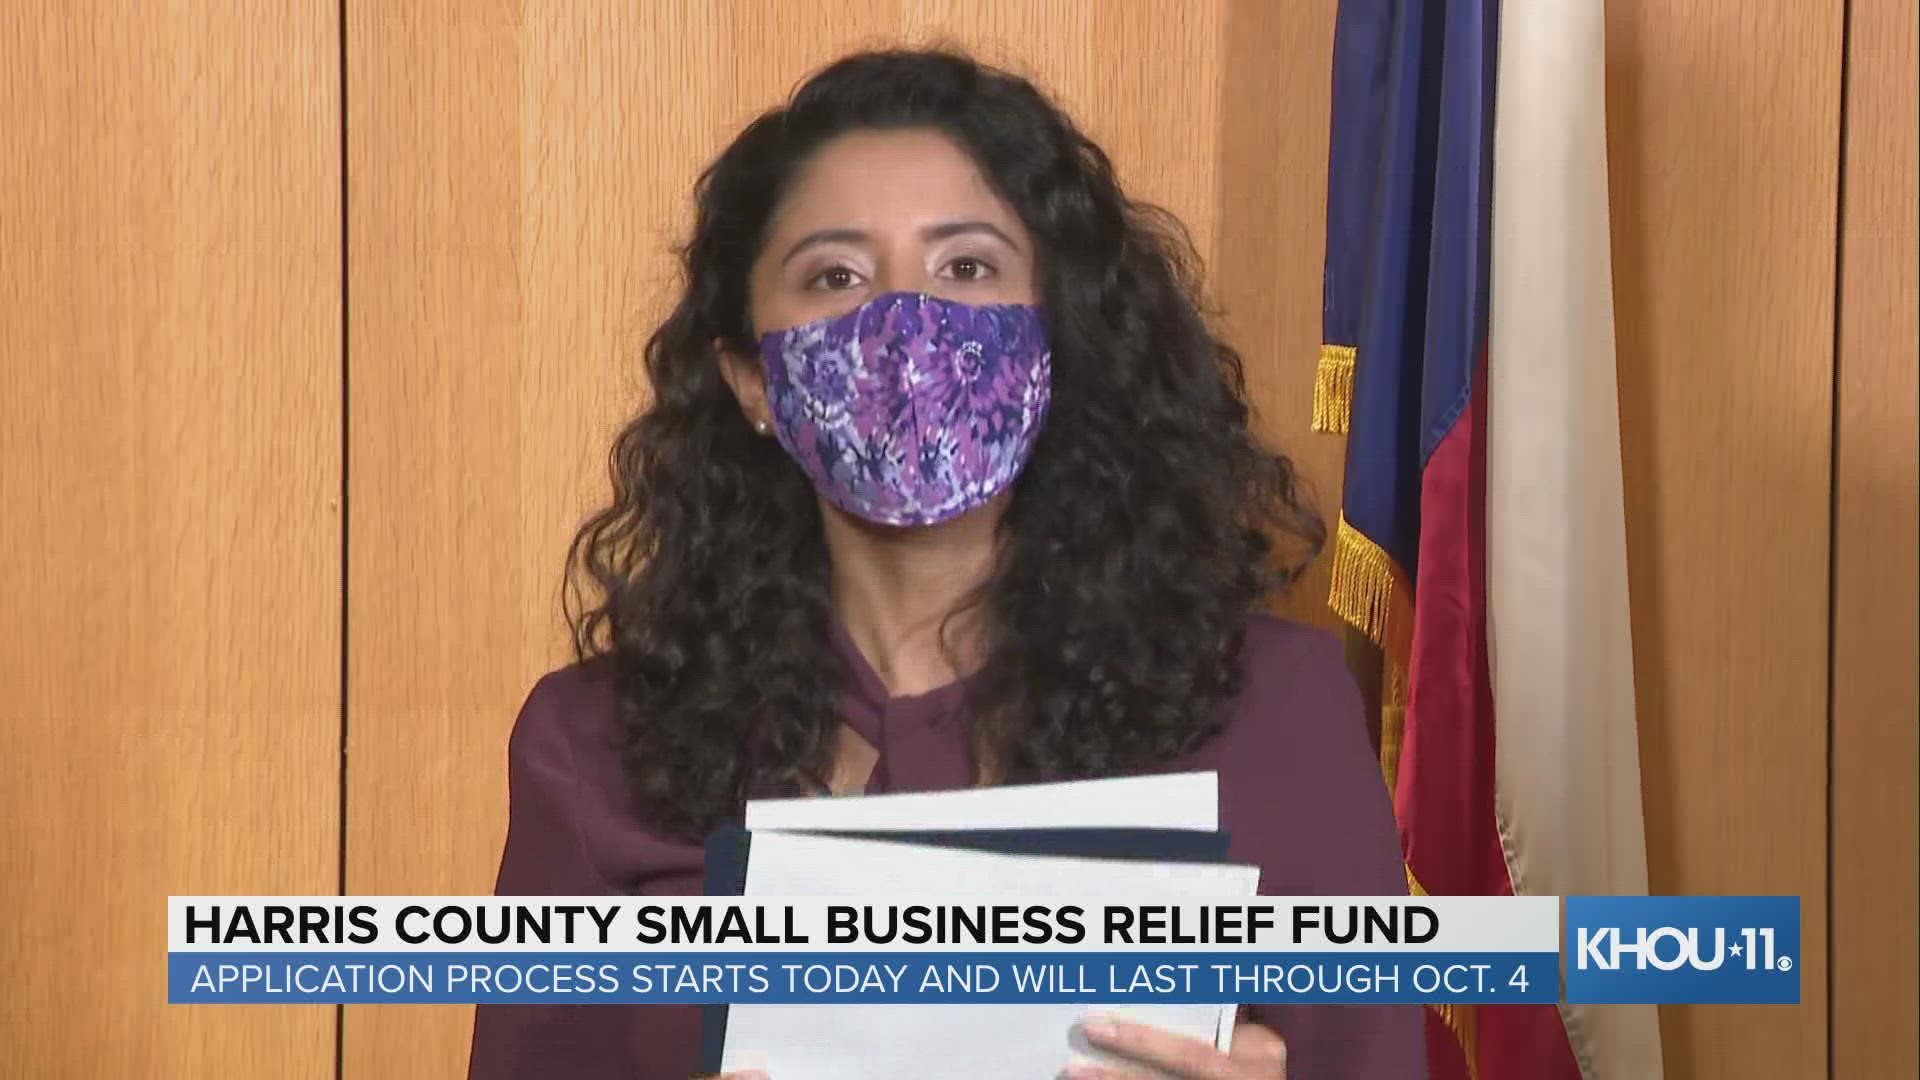 Harris County Small Business Relief Fund Applications open